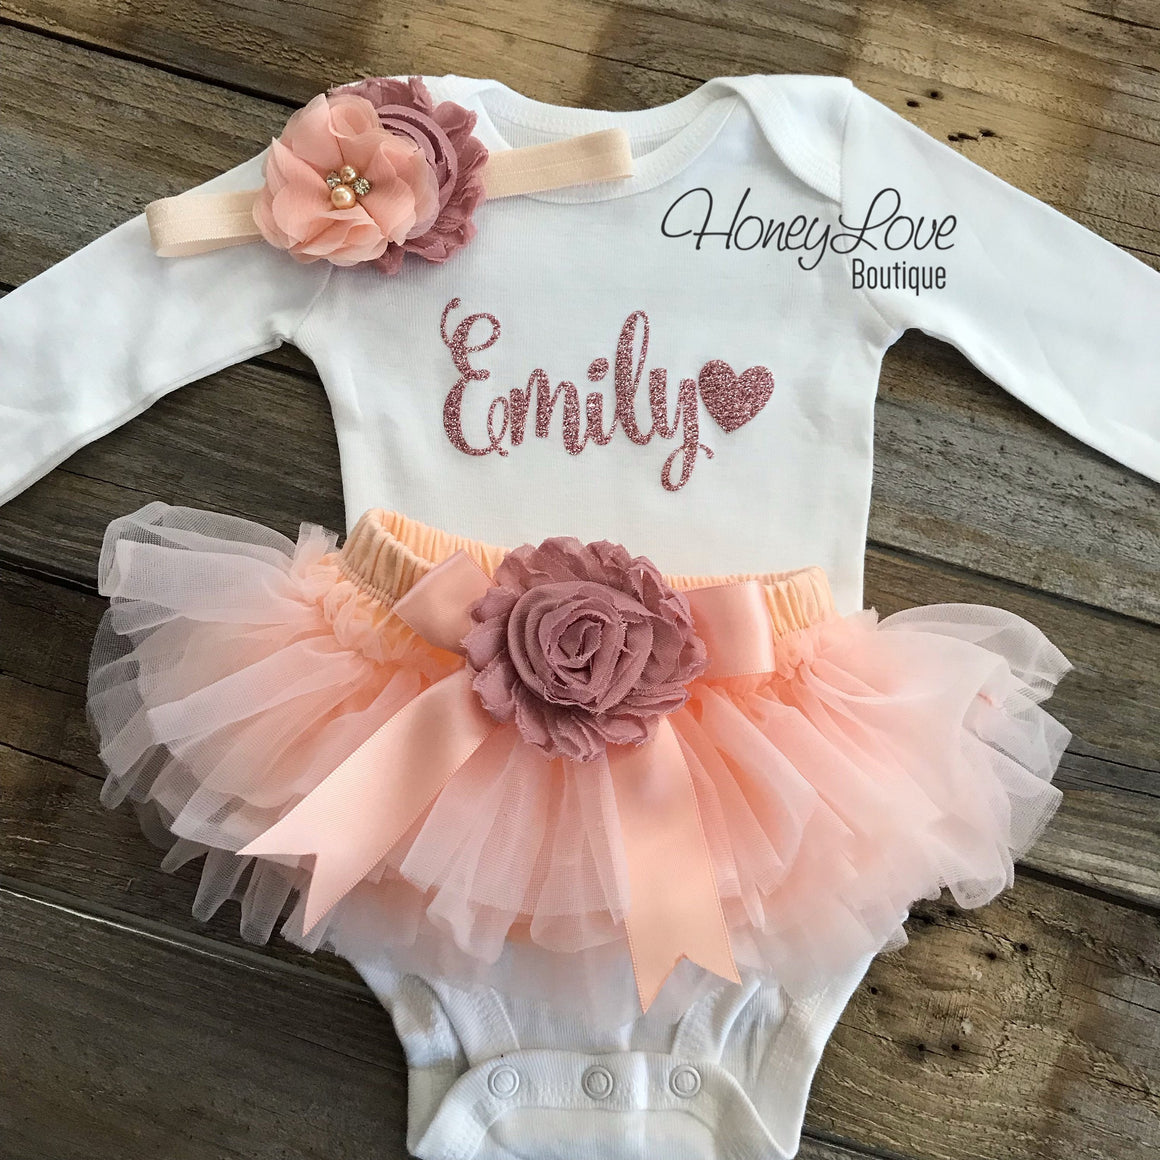 PERSONALIZED Name Outfit - Rose Gold glitter and Peach/Vintage Pink - embellished tutu skirt bloomers - HoneyLoveBoutique